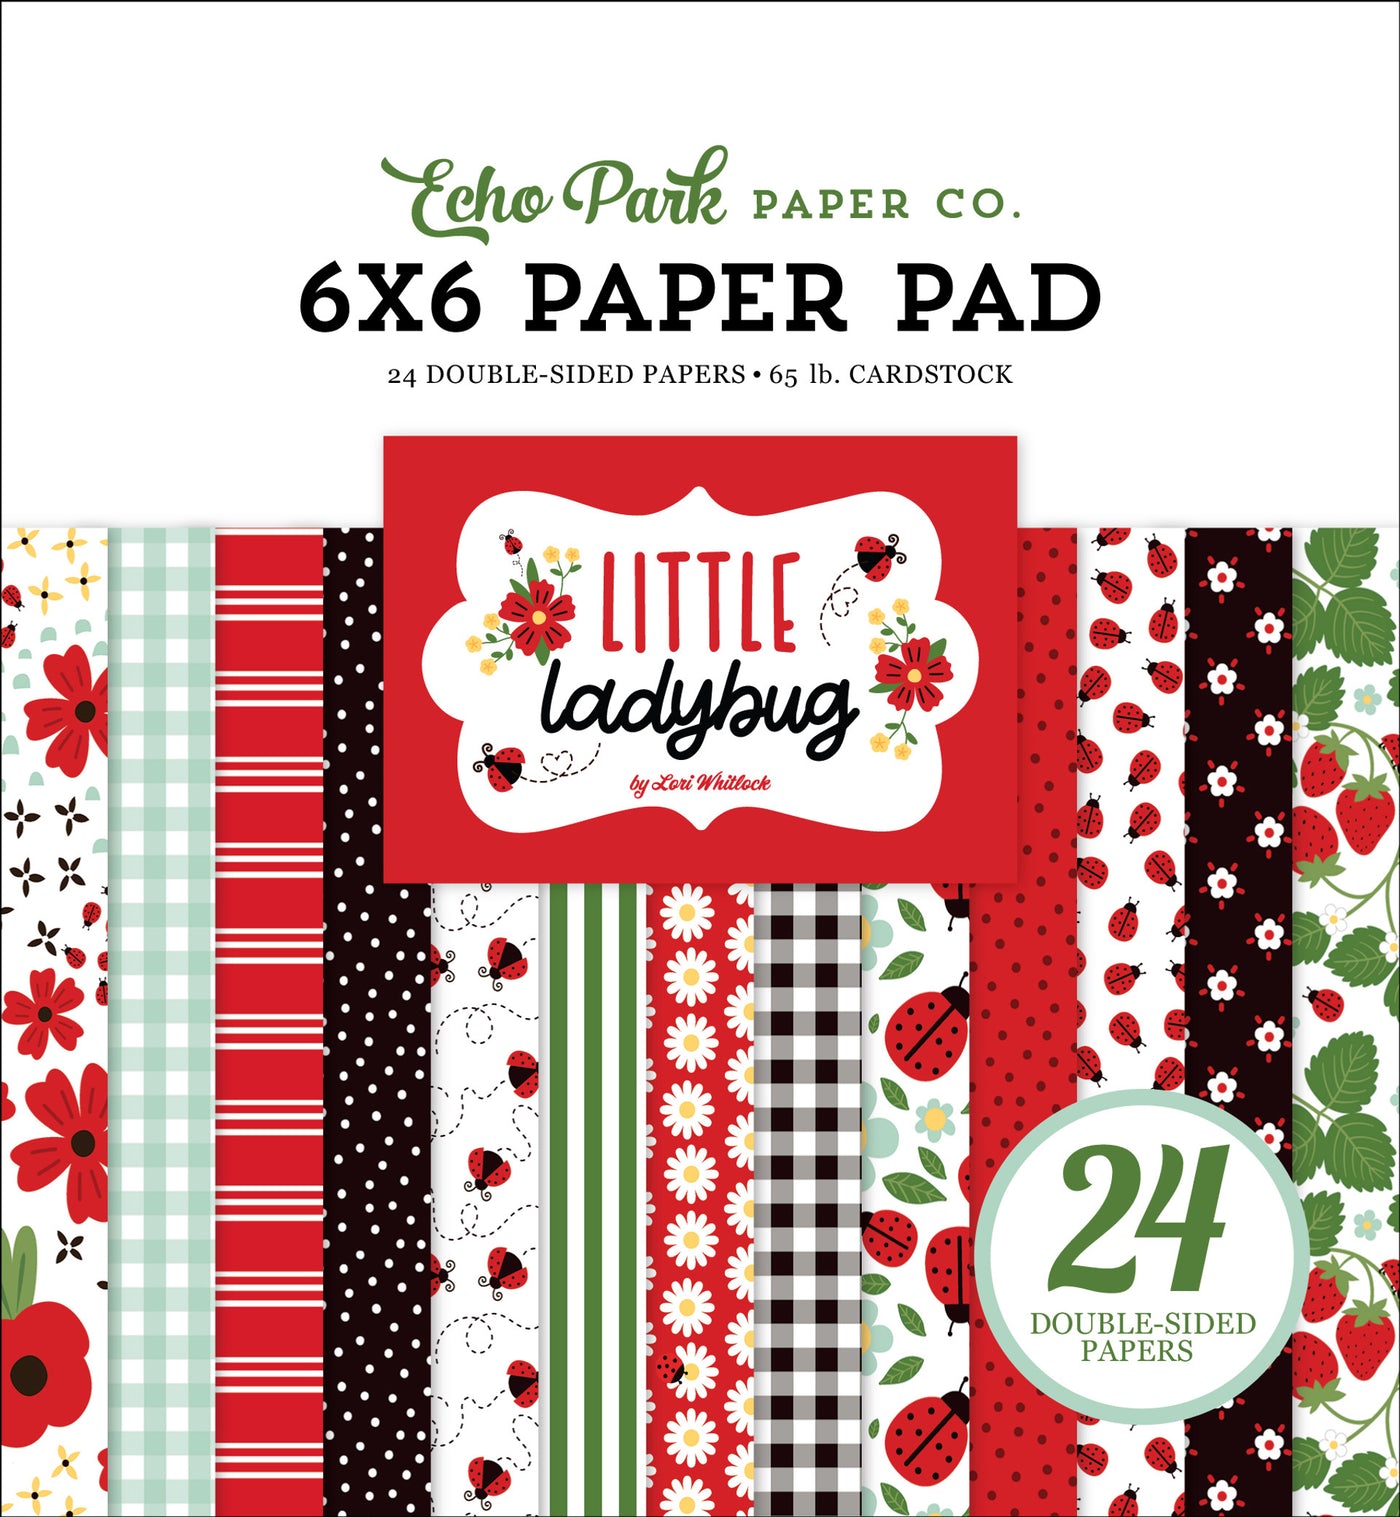 The 6x6 pad features cute designs and colors to celebrate everything, ladybug! It includes 24 double-sided pages and is fun for cards and papercrafts.